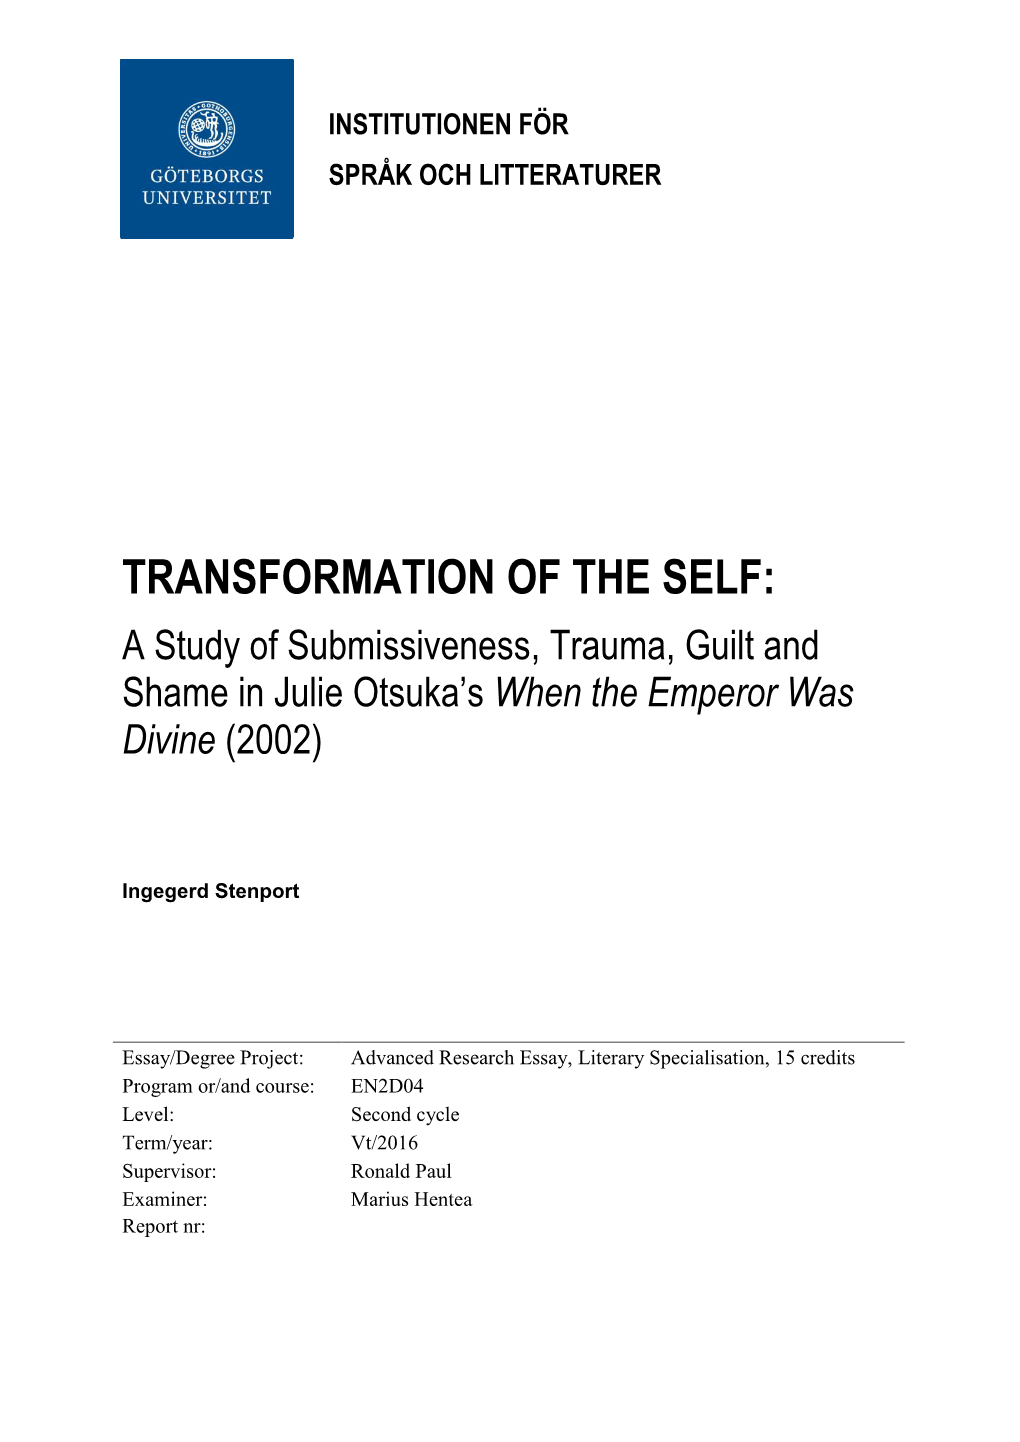 TRANSFORMATION of the SELF: a Study of Submissiveness, Trauma, Guilt and Shame in Julie Otsuka’S When the Emperor Was Divine (2002)